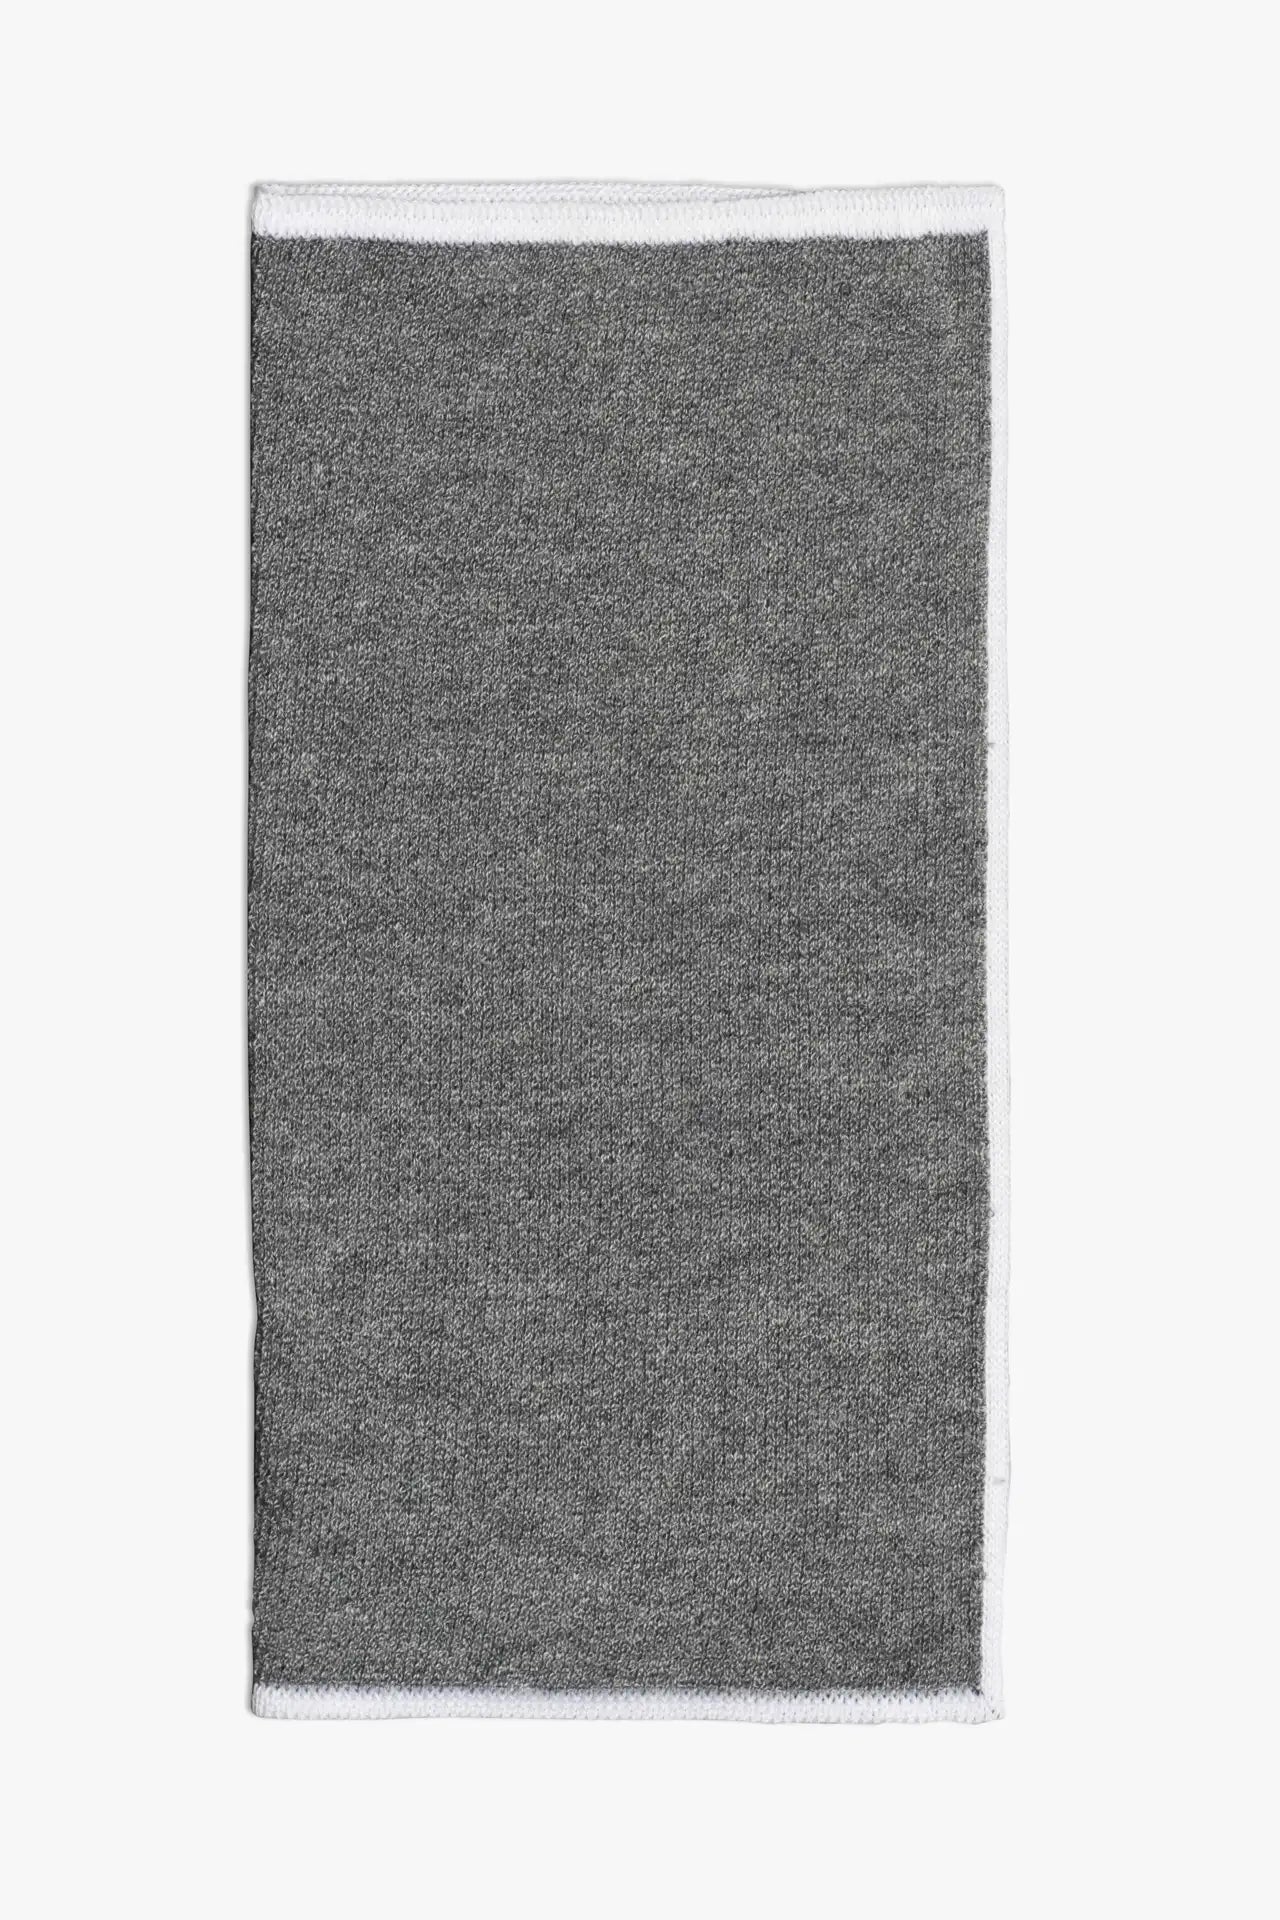 Gray knitted pocket square with white boarder in knitted cotton 